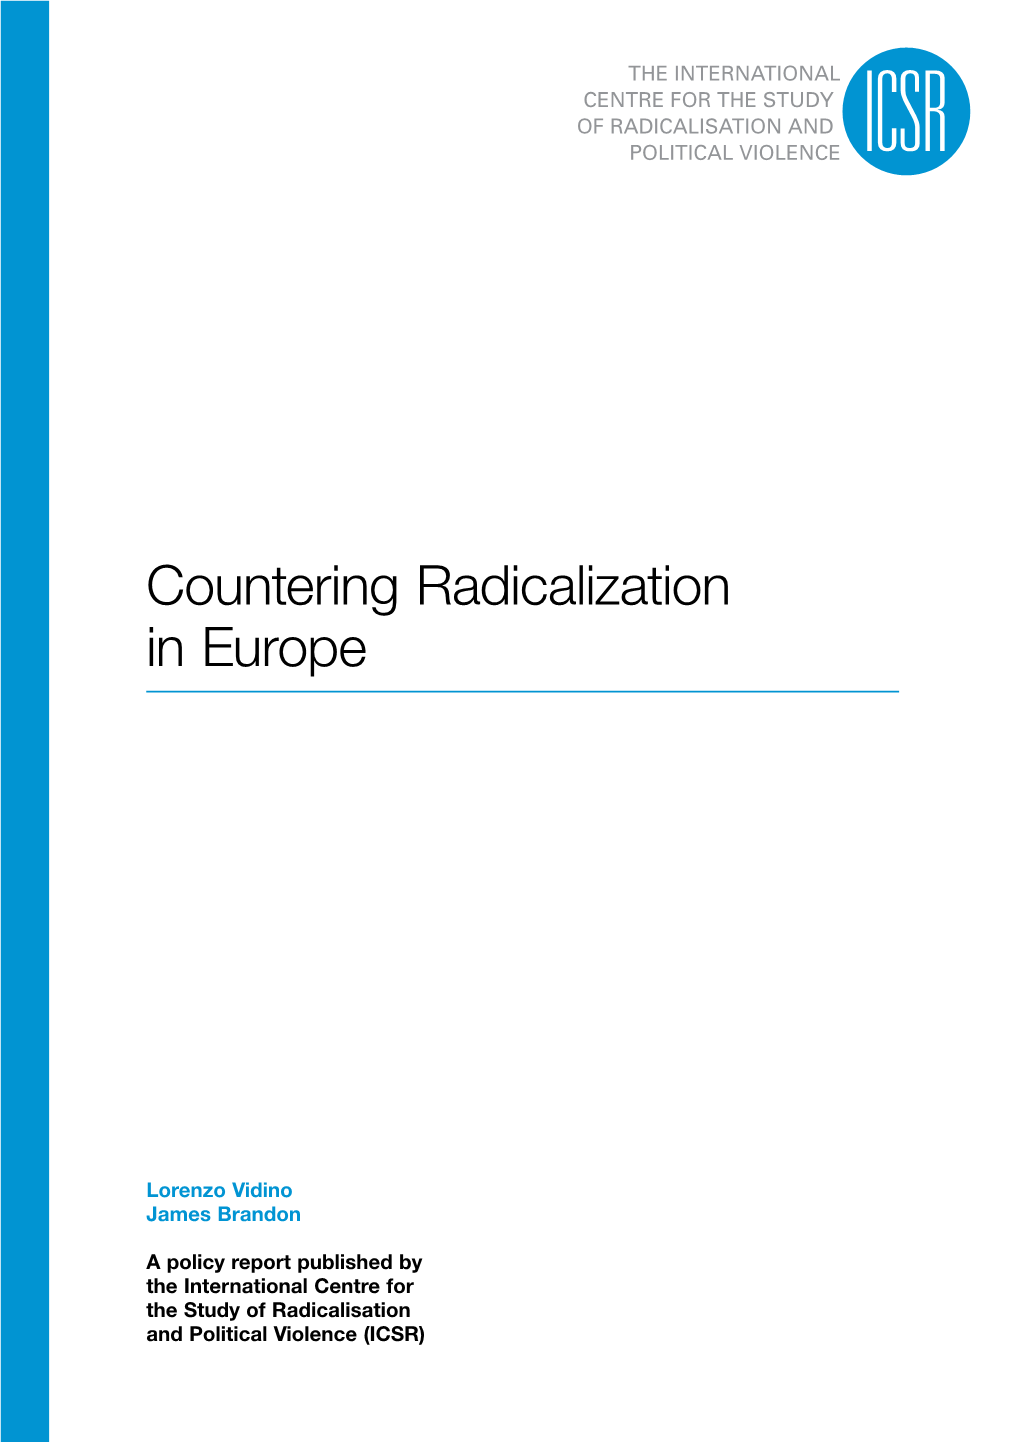 Countering Radicalization in Europe